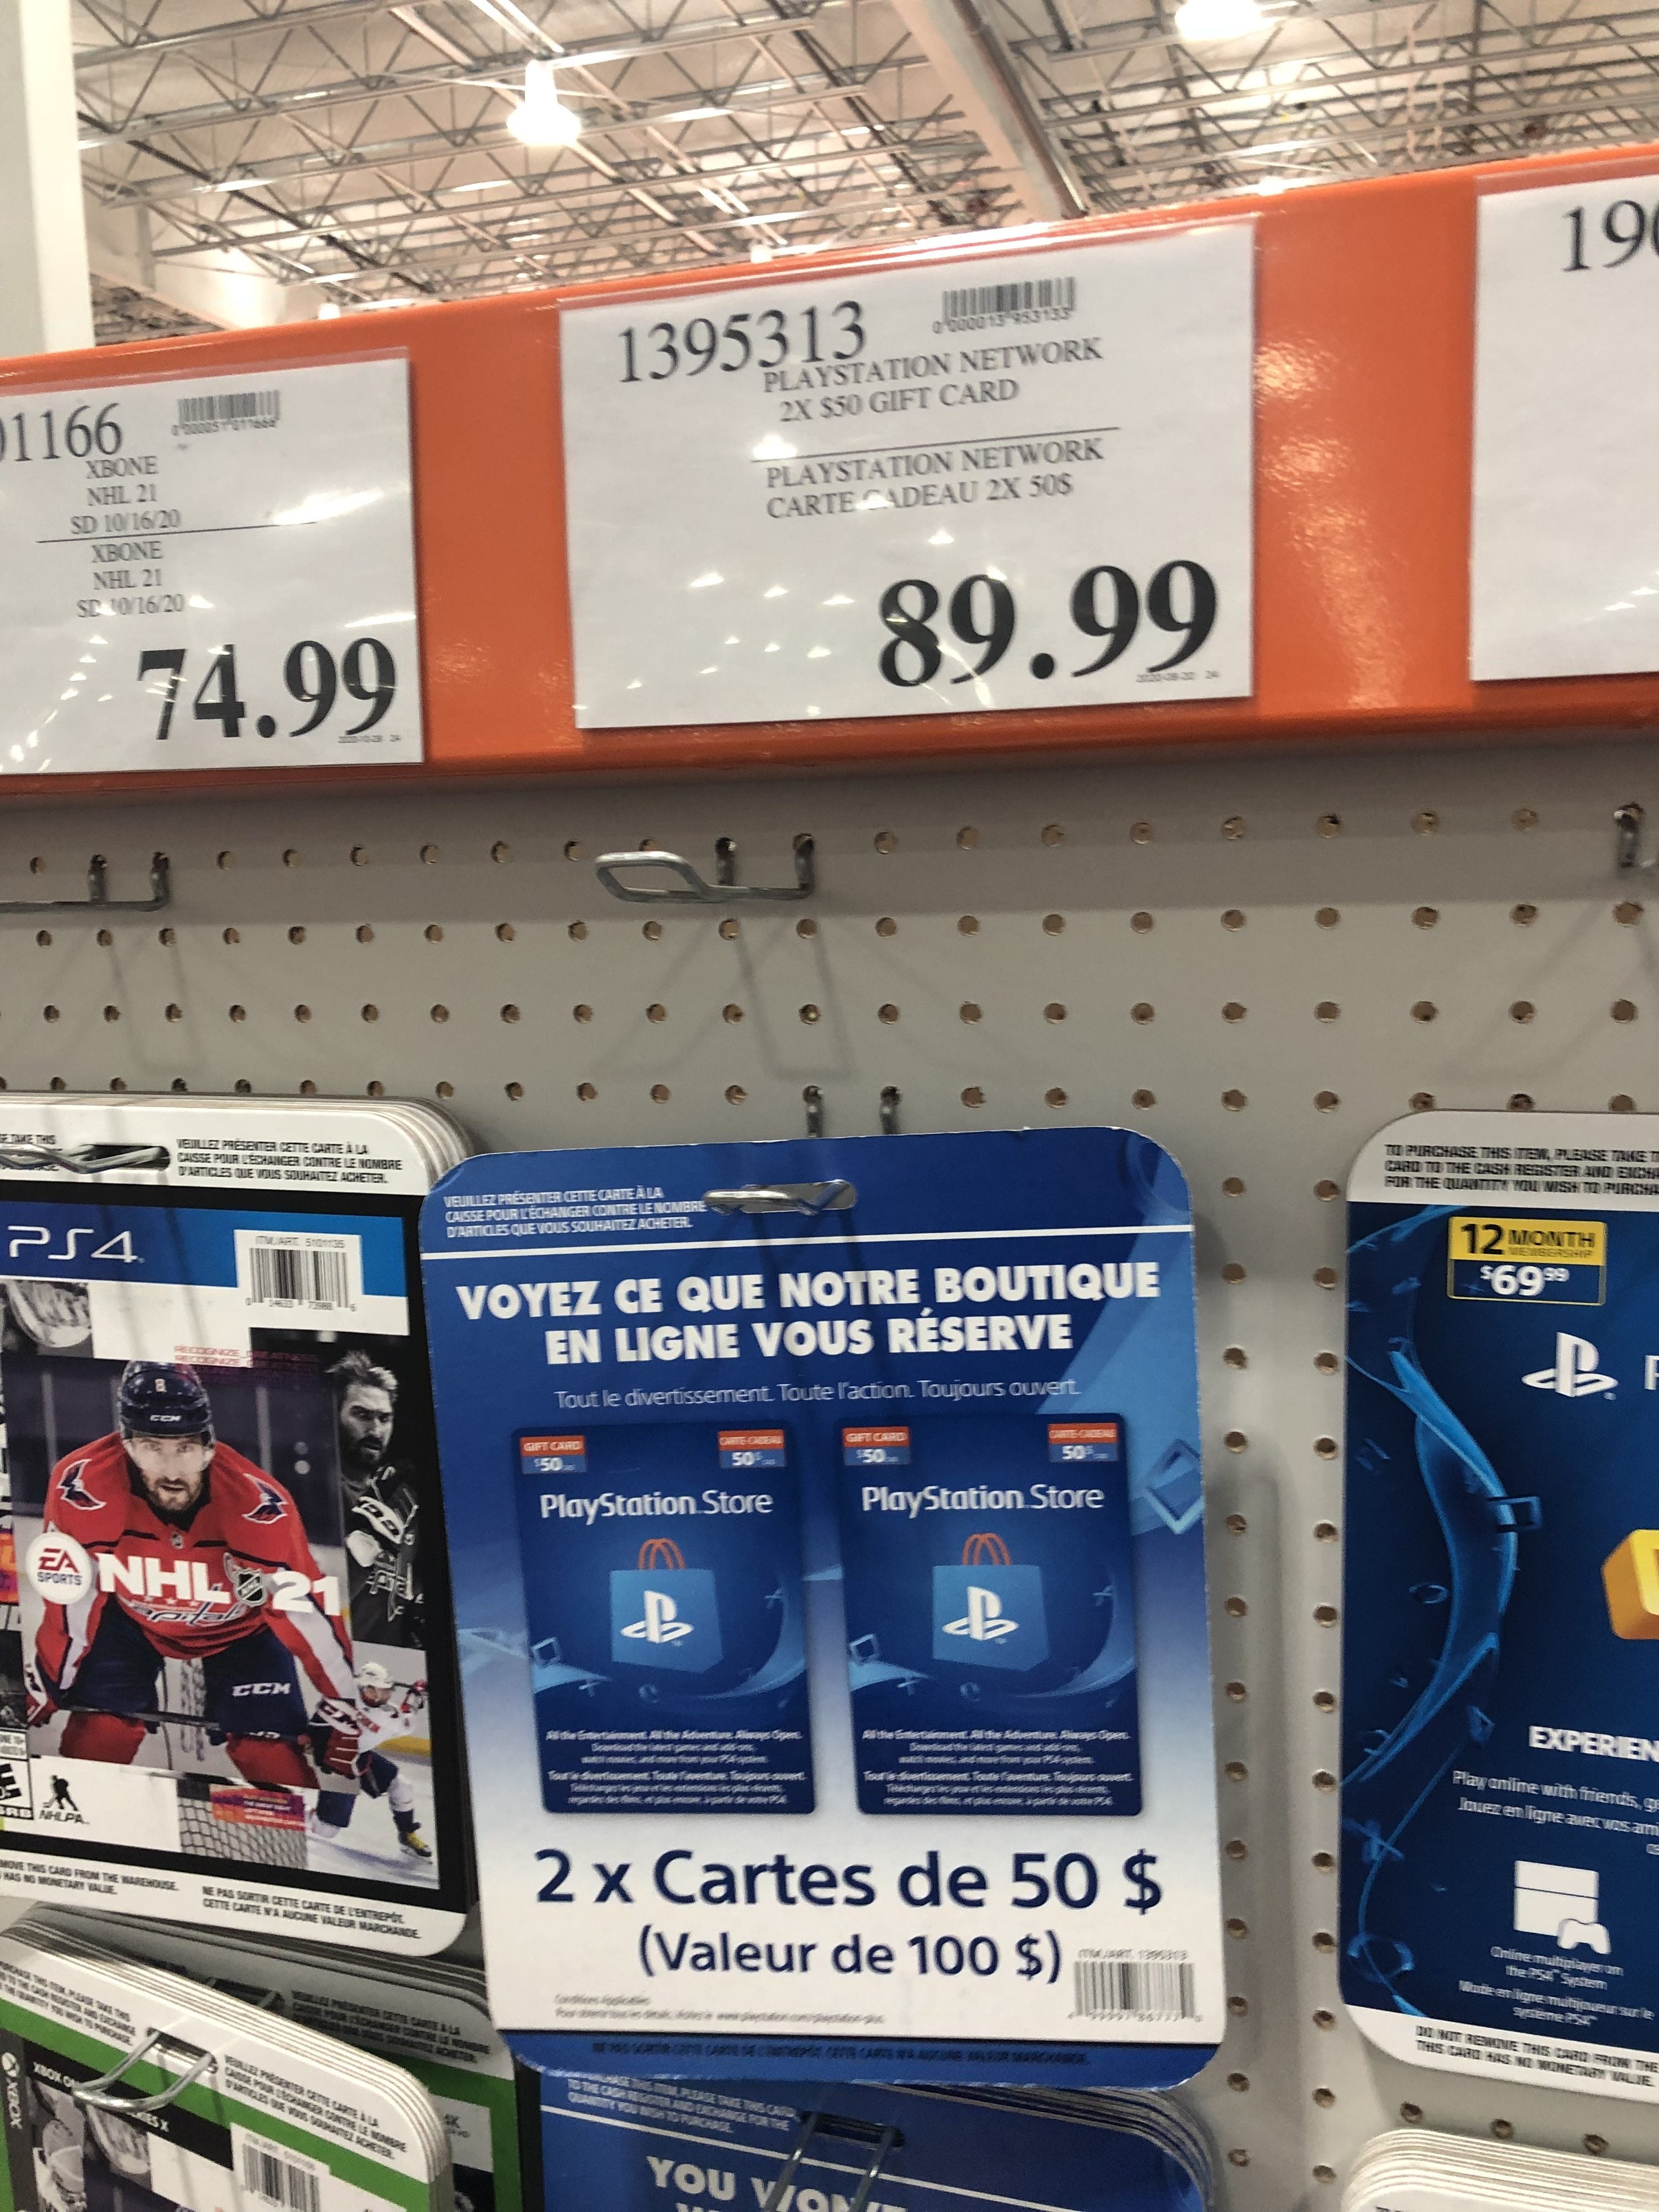 Costco] PlayStation network $100 card for $89.99, everybody's golf ps4 $9.96 add Walmart in store game deal photo RedFlagDeals.com Forums